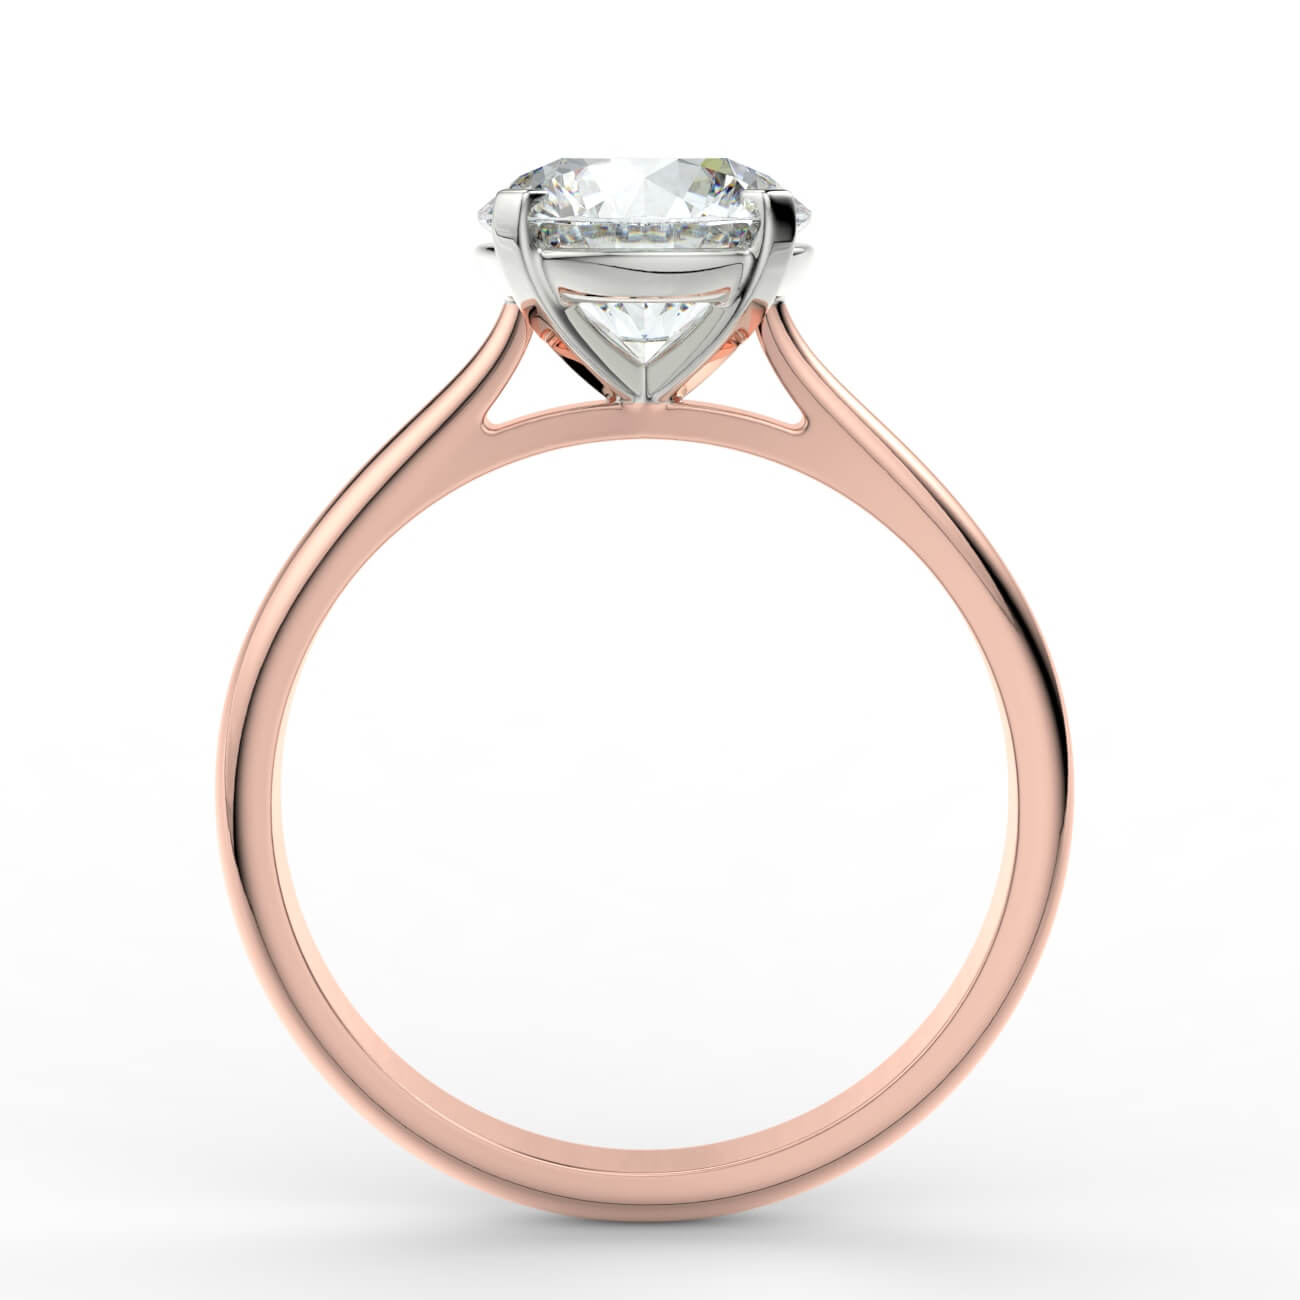 Round brilliant cut diamond cathedral engagement ring in rose and white gold – Australian Diamond Network